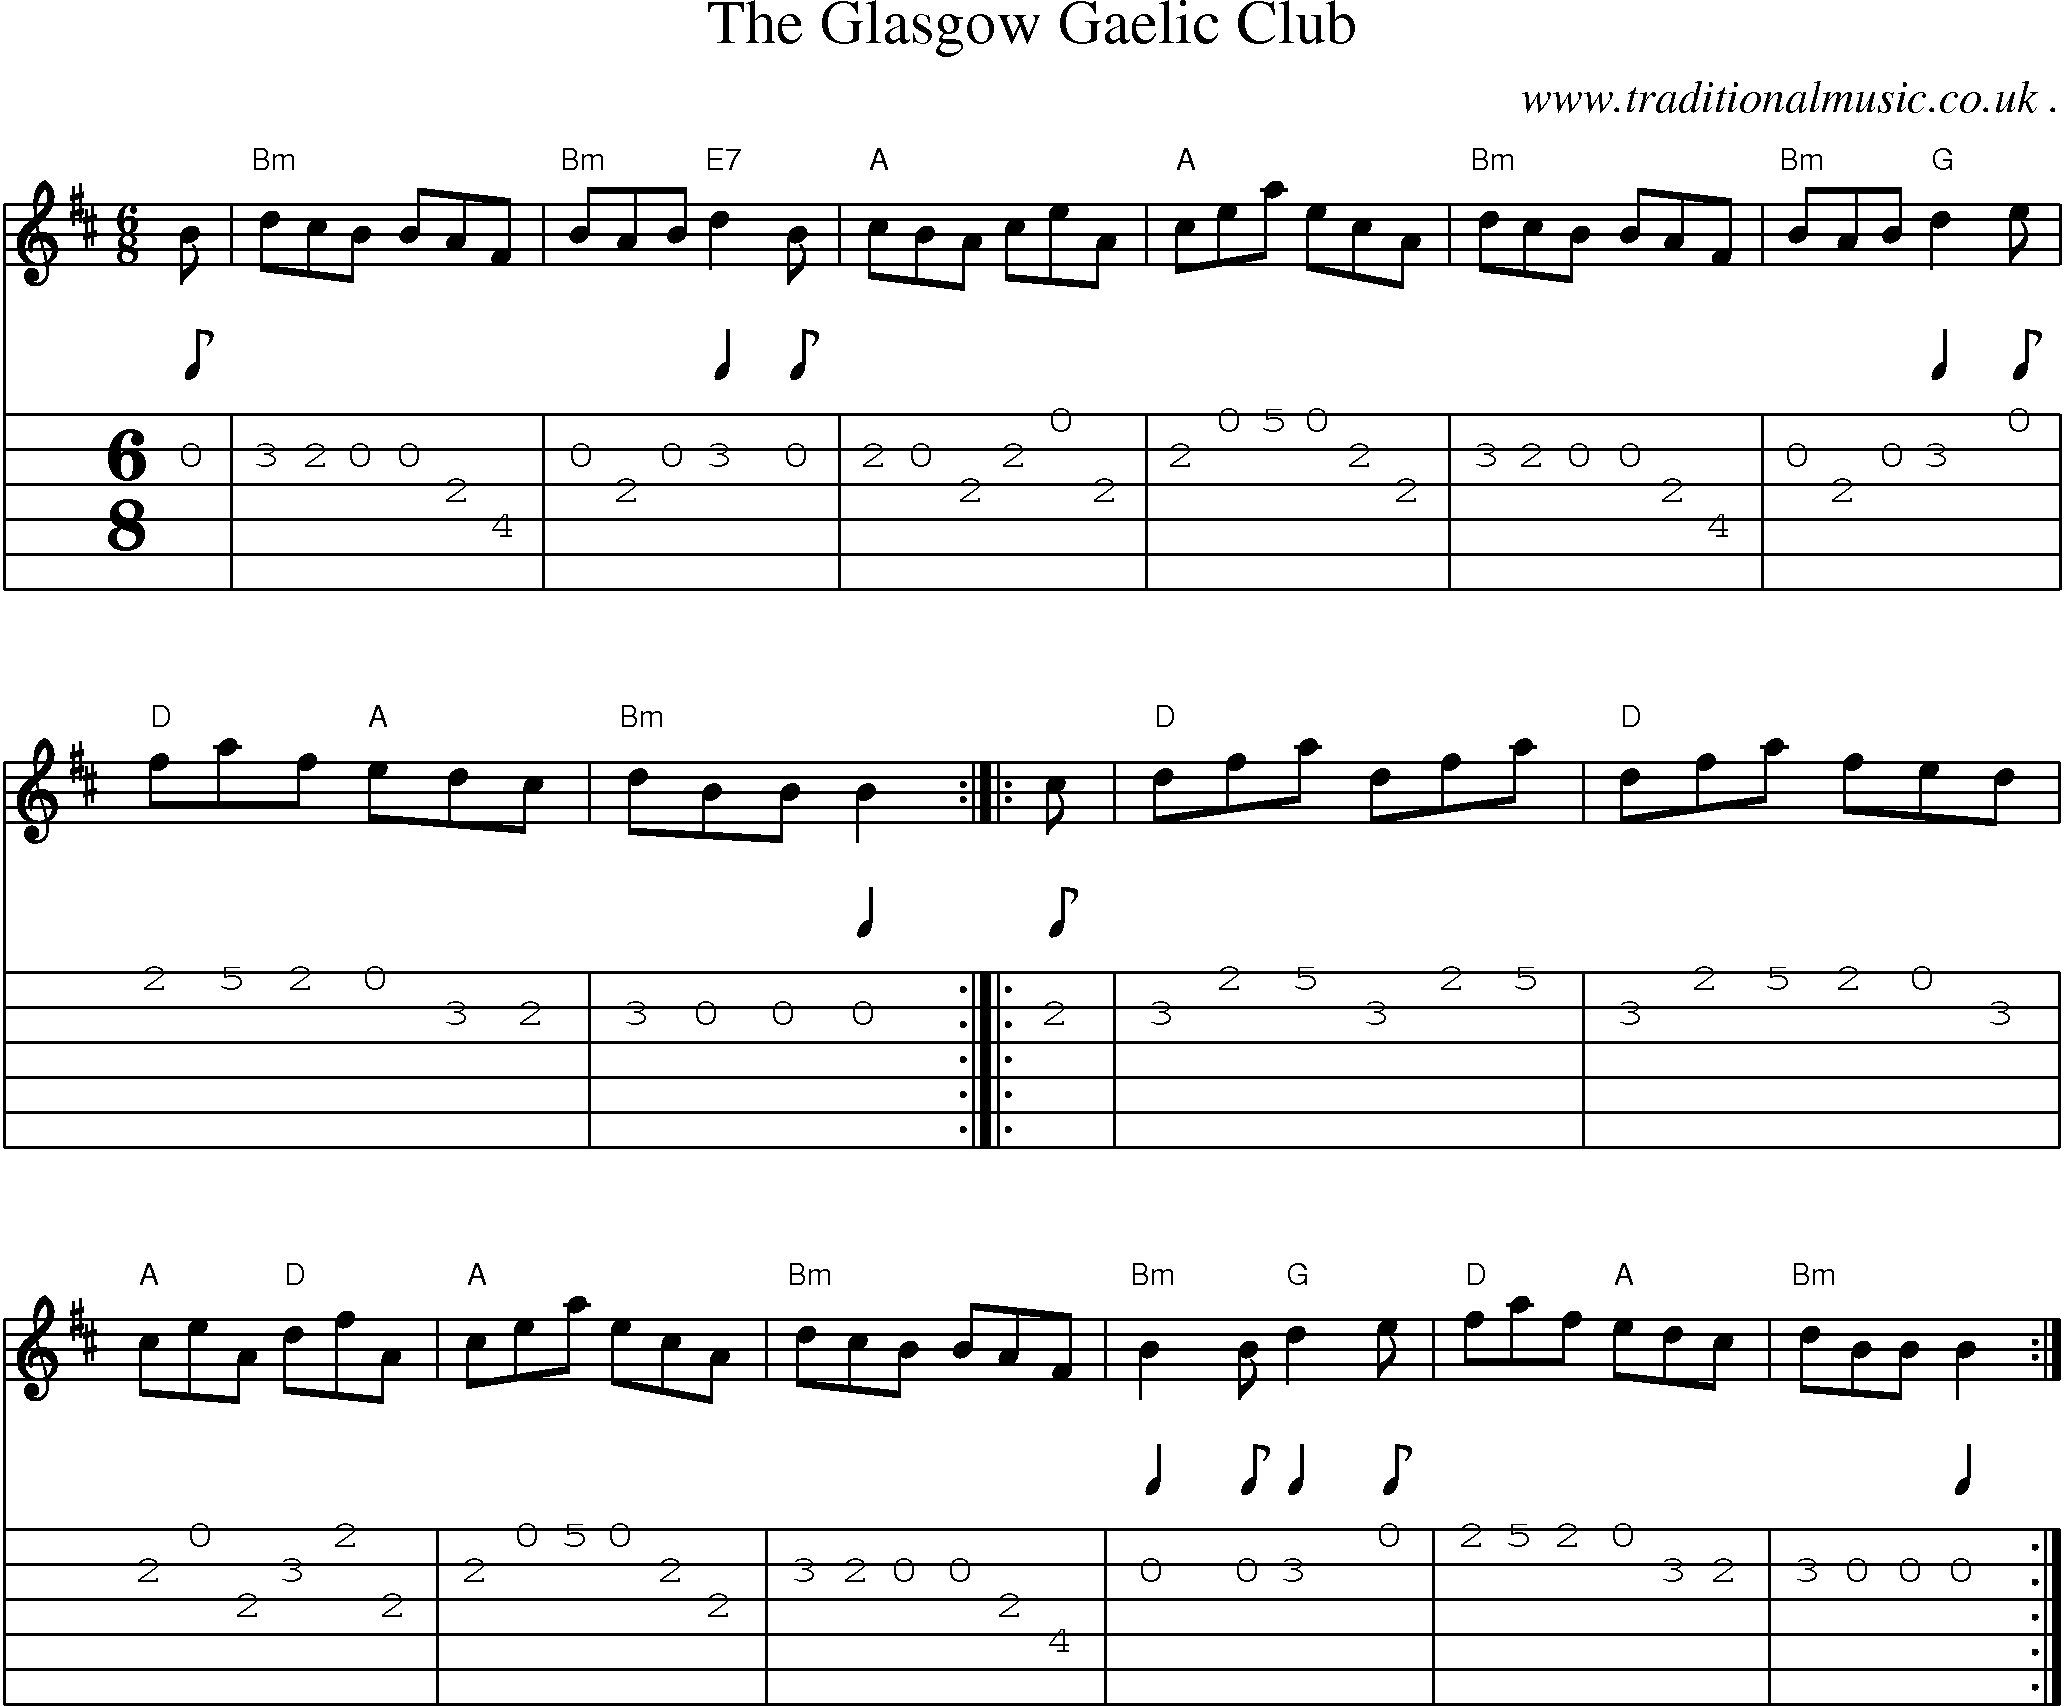 Sheet-music  score, Chords and Guitar Tabs for The Glasgow Gaelic Club